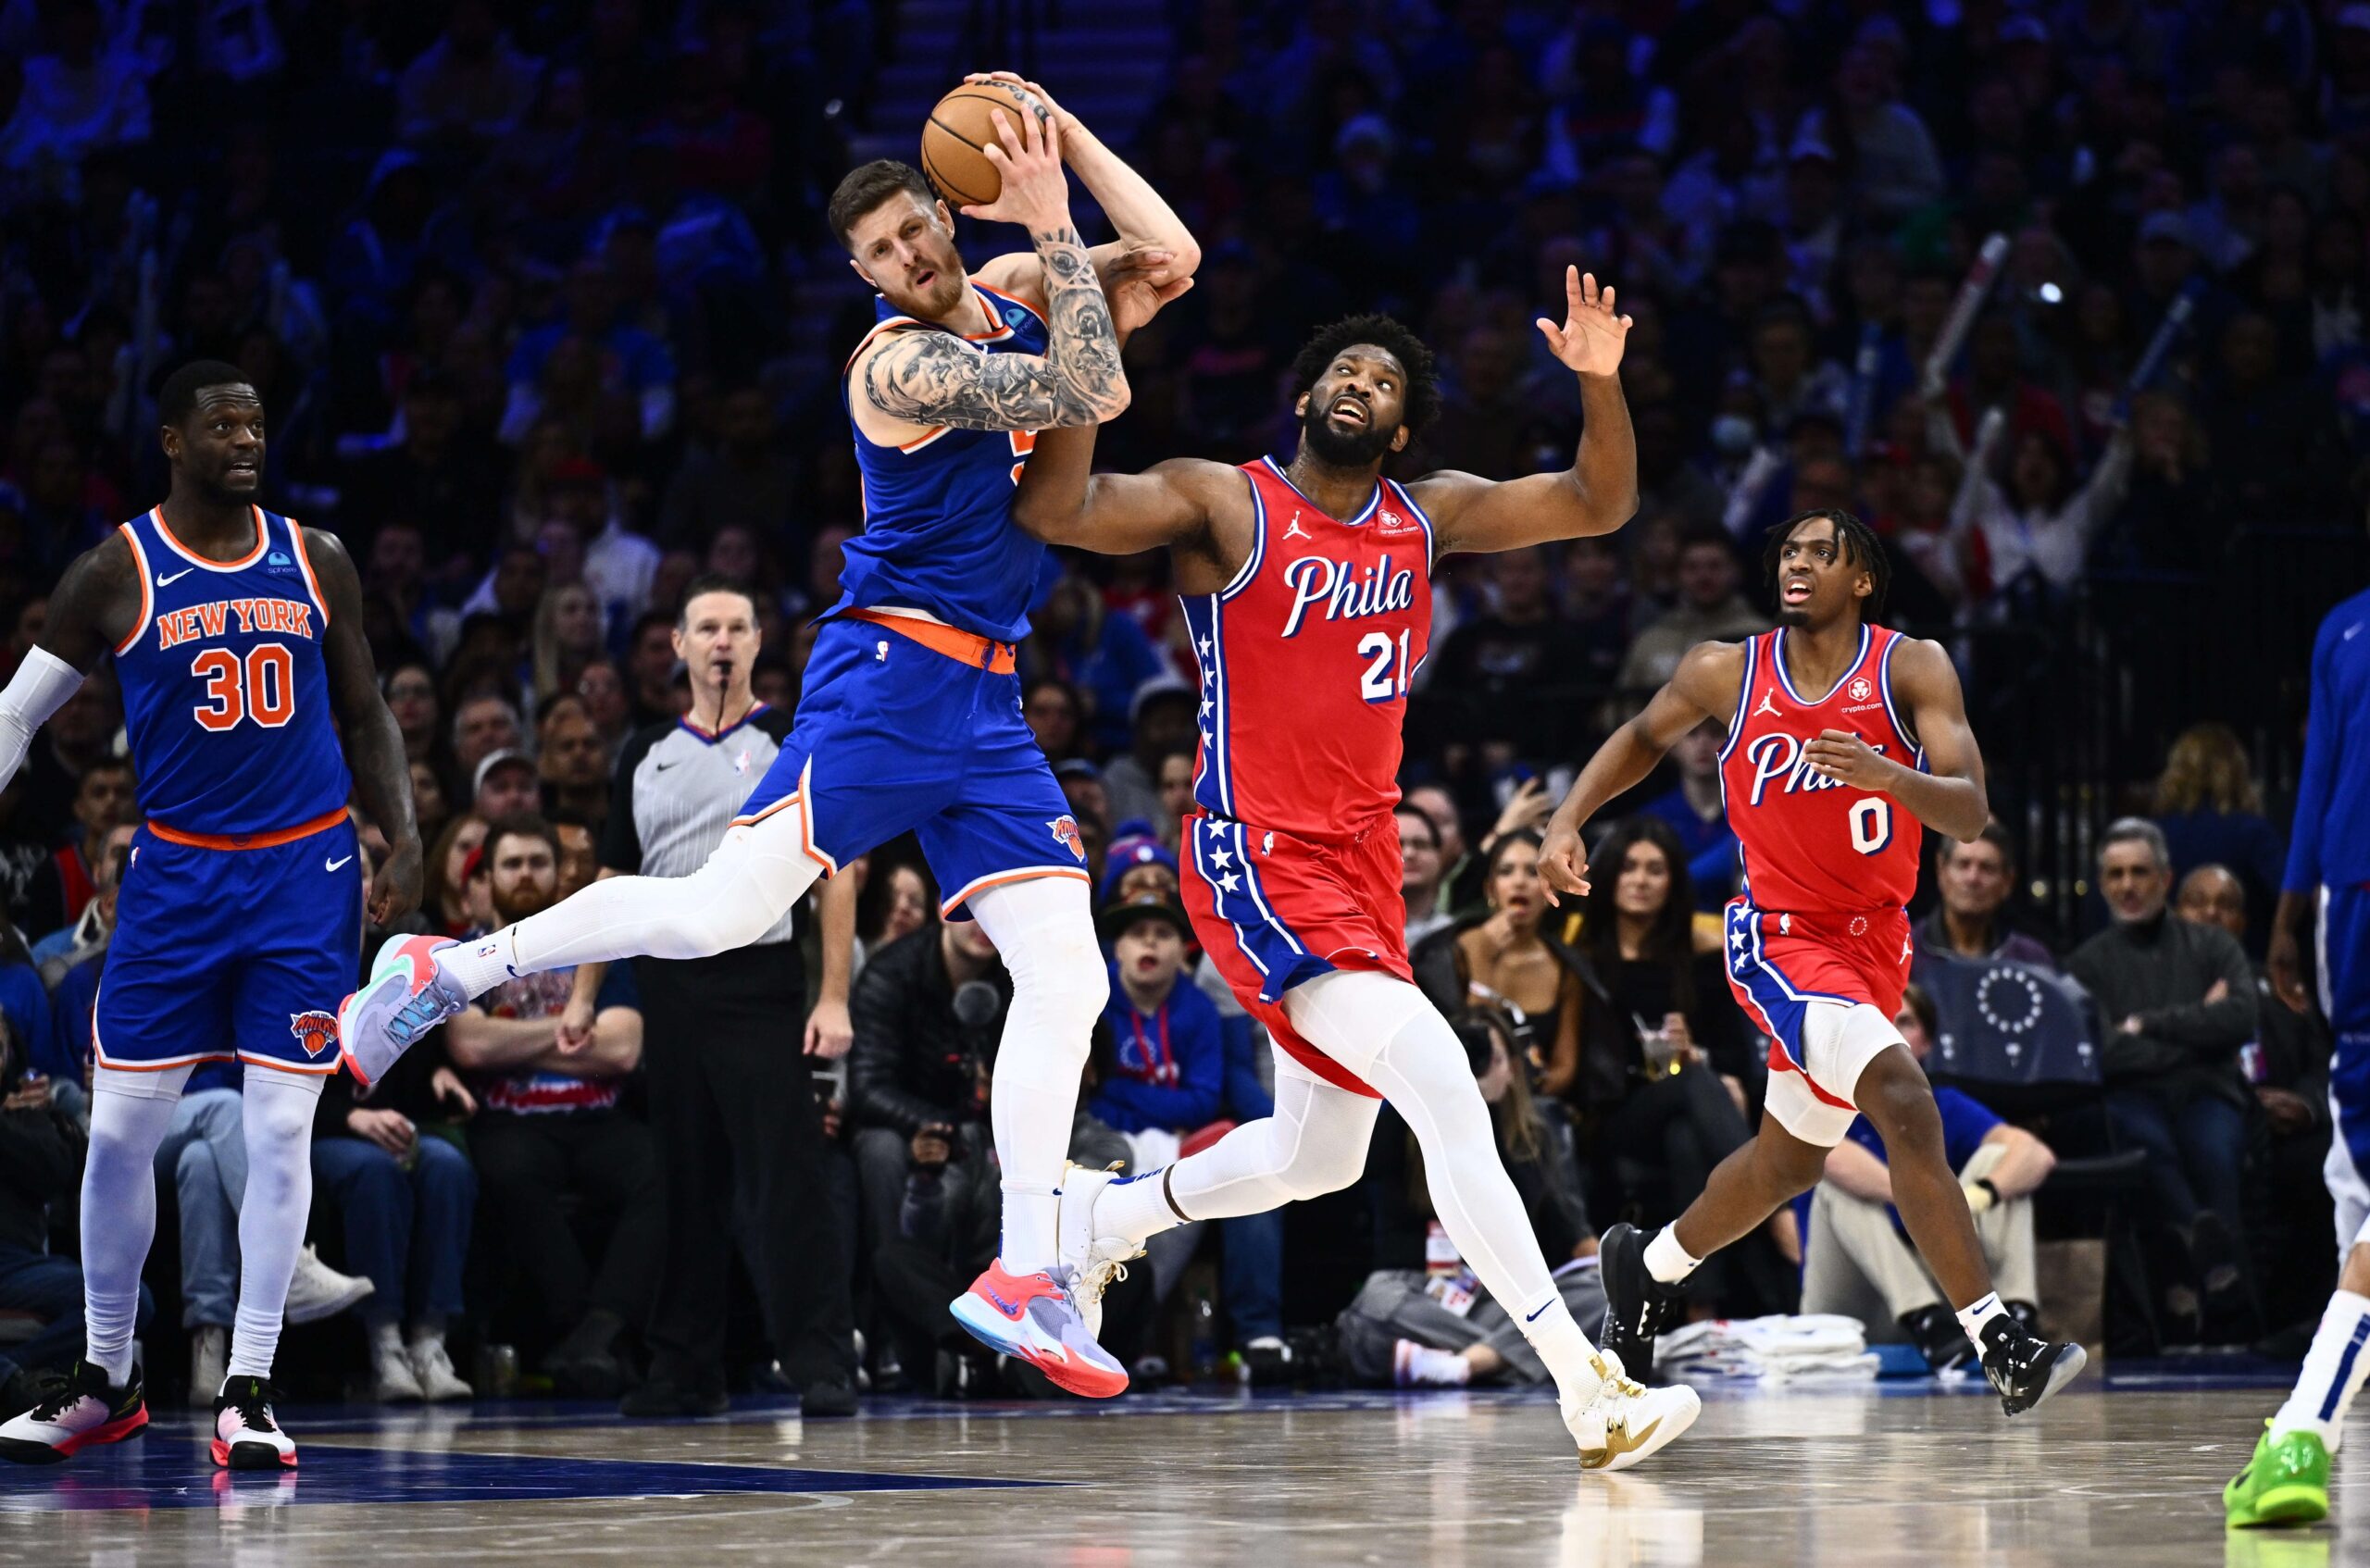 Who Are The New York Knicks 3 X Factors Against 76ers?